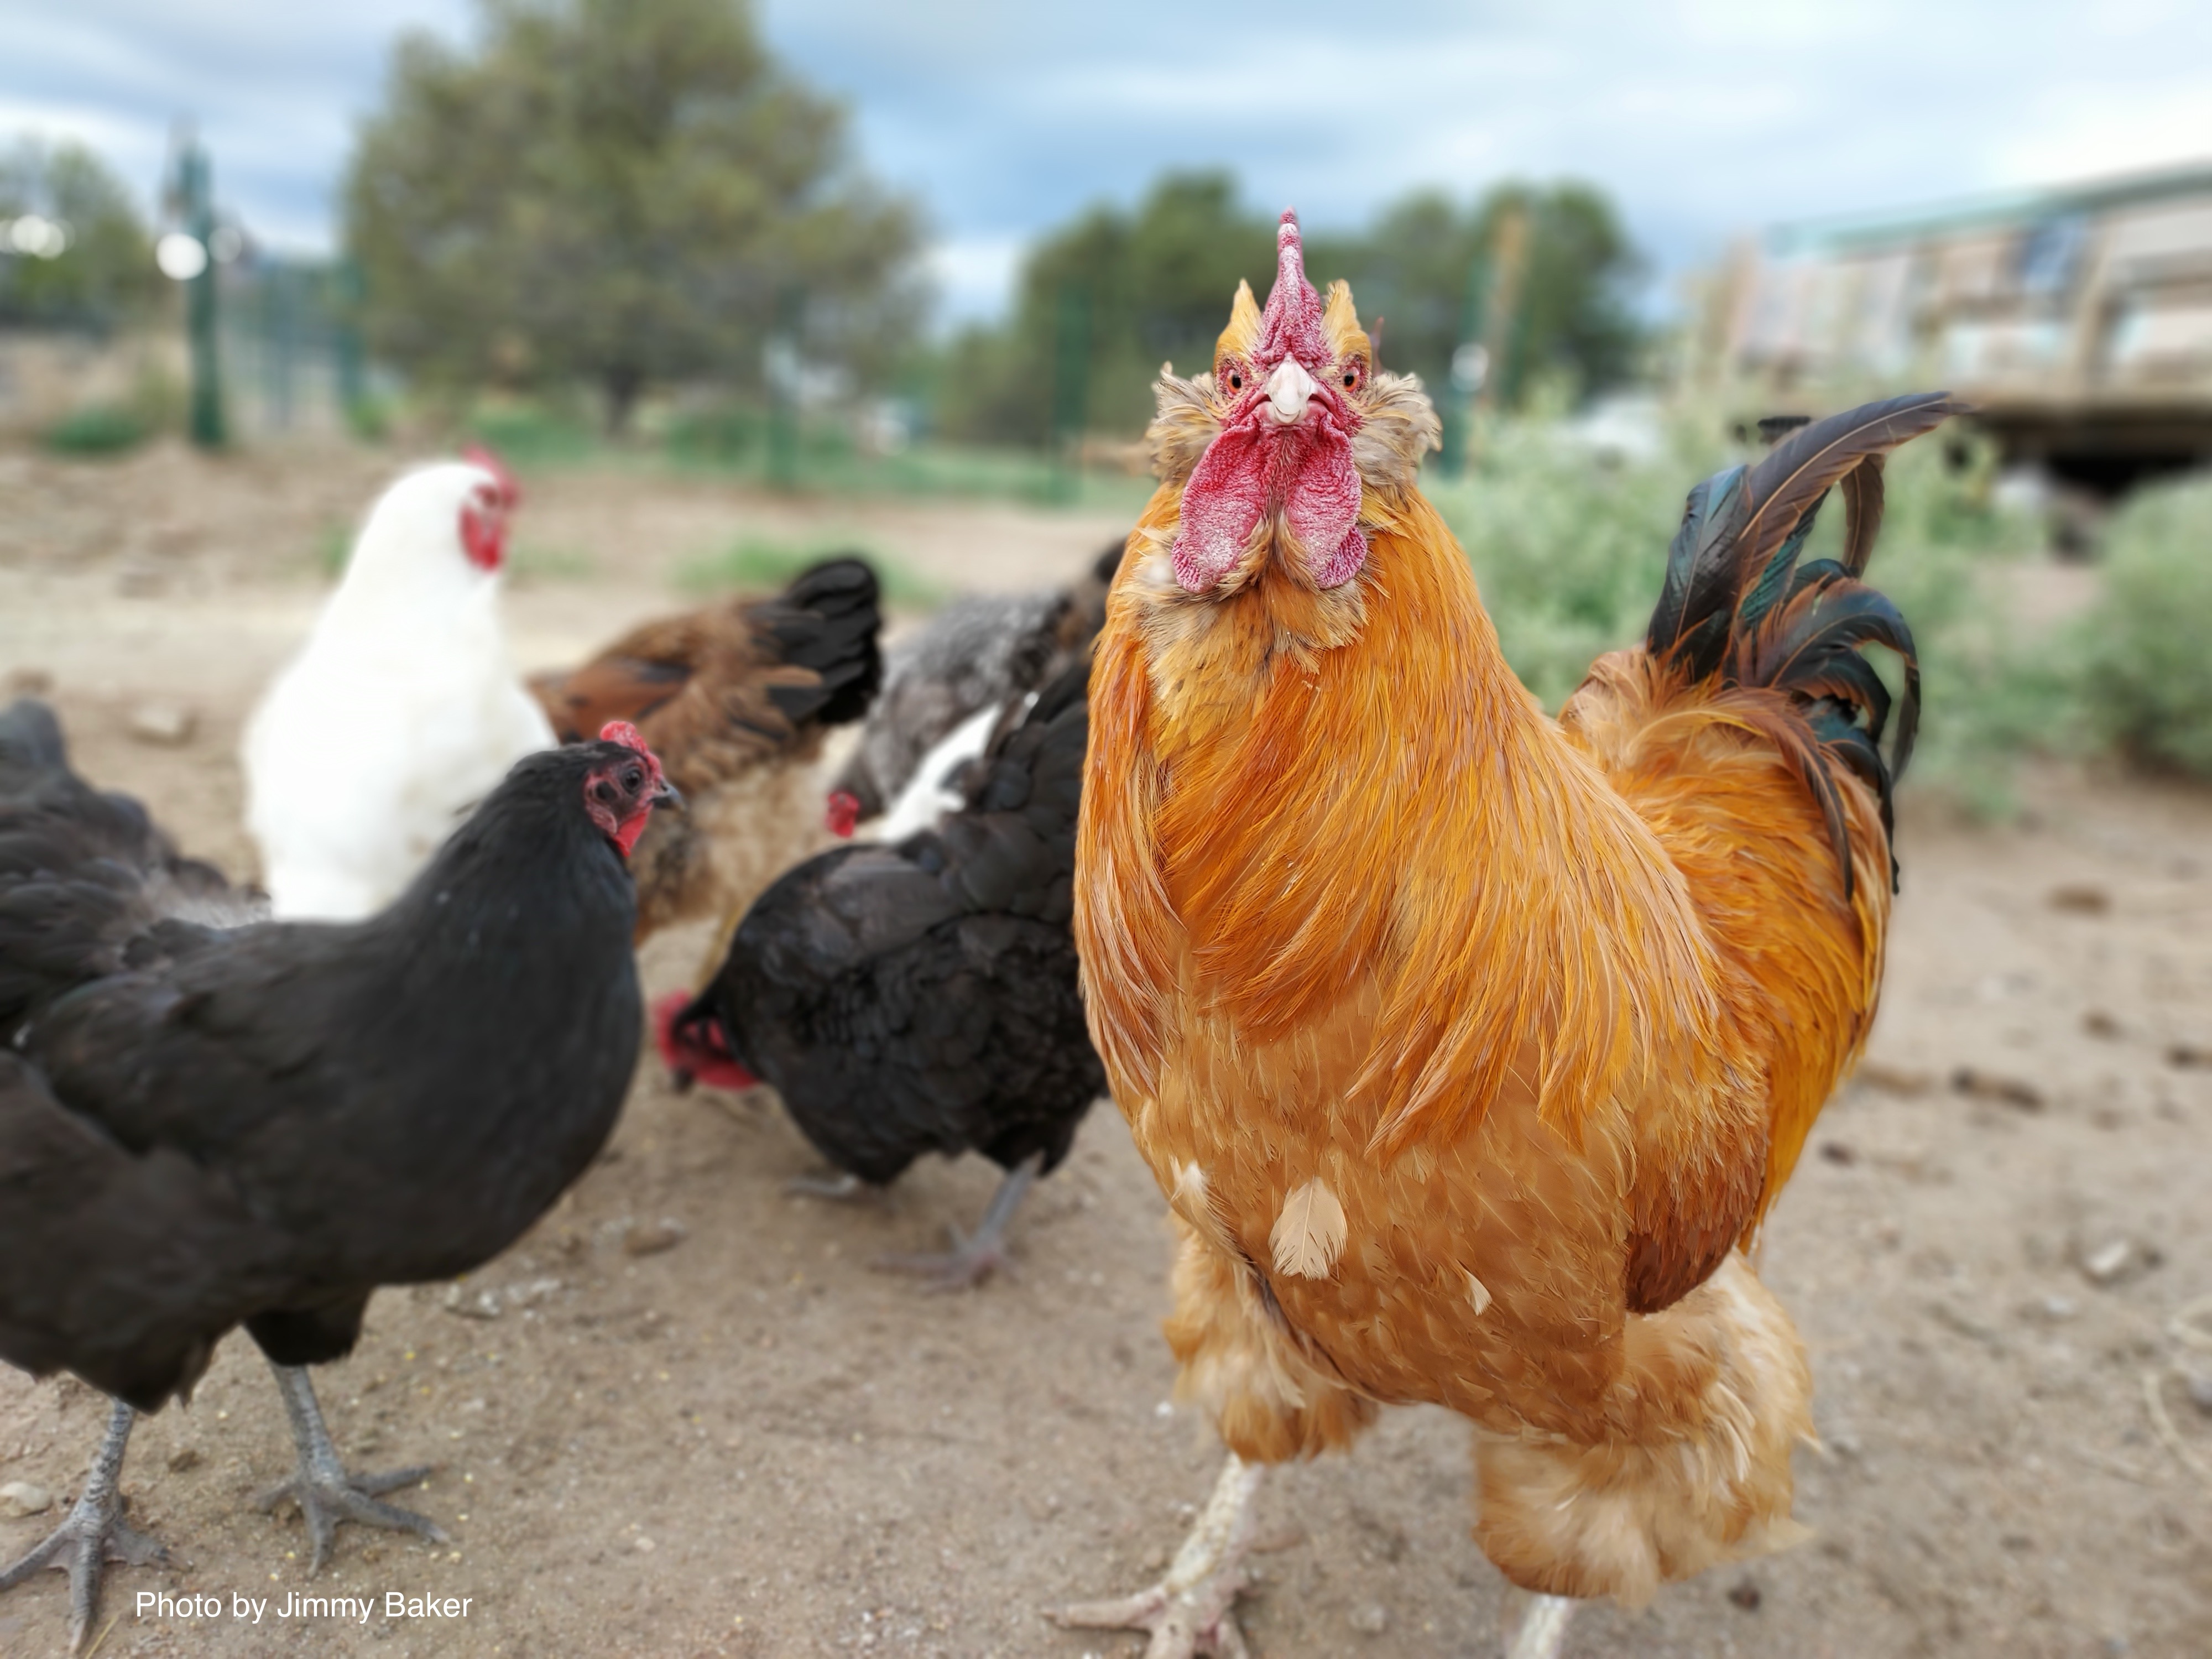 A rooster stares at the camera and hens feed from the ground in the background